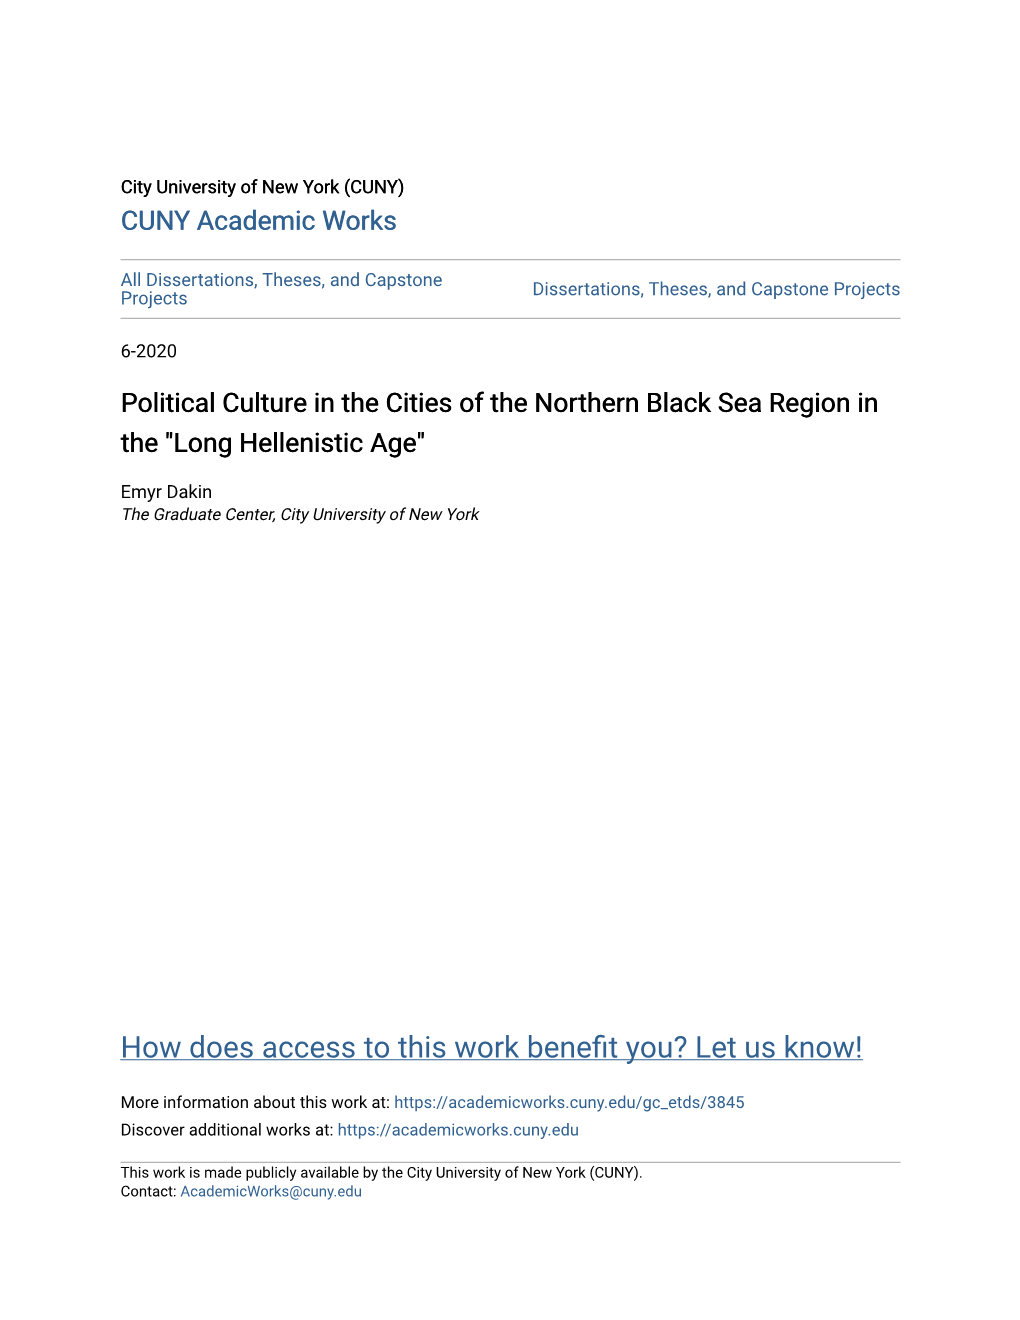 Political Culture in the Cities of the Northern Black Sea Region in the "Long Hellenistic Age"